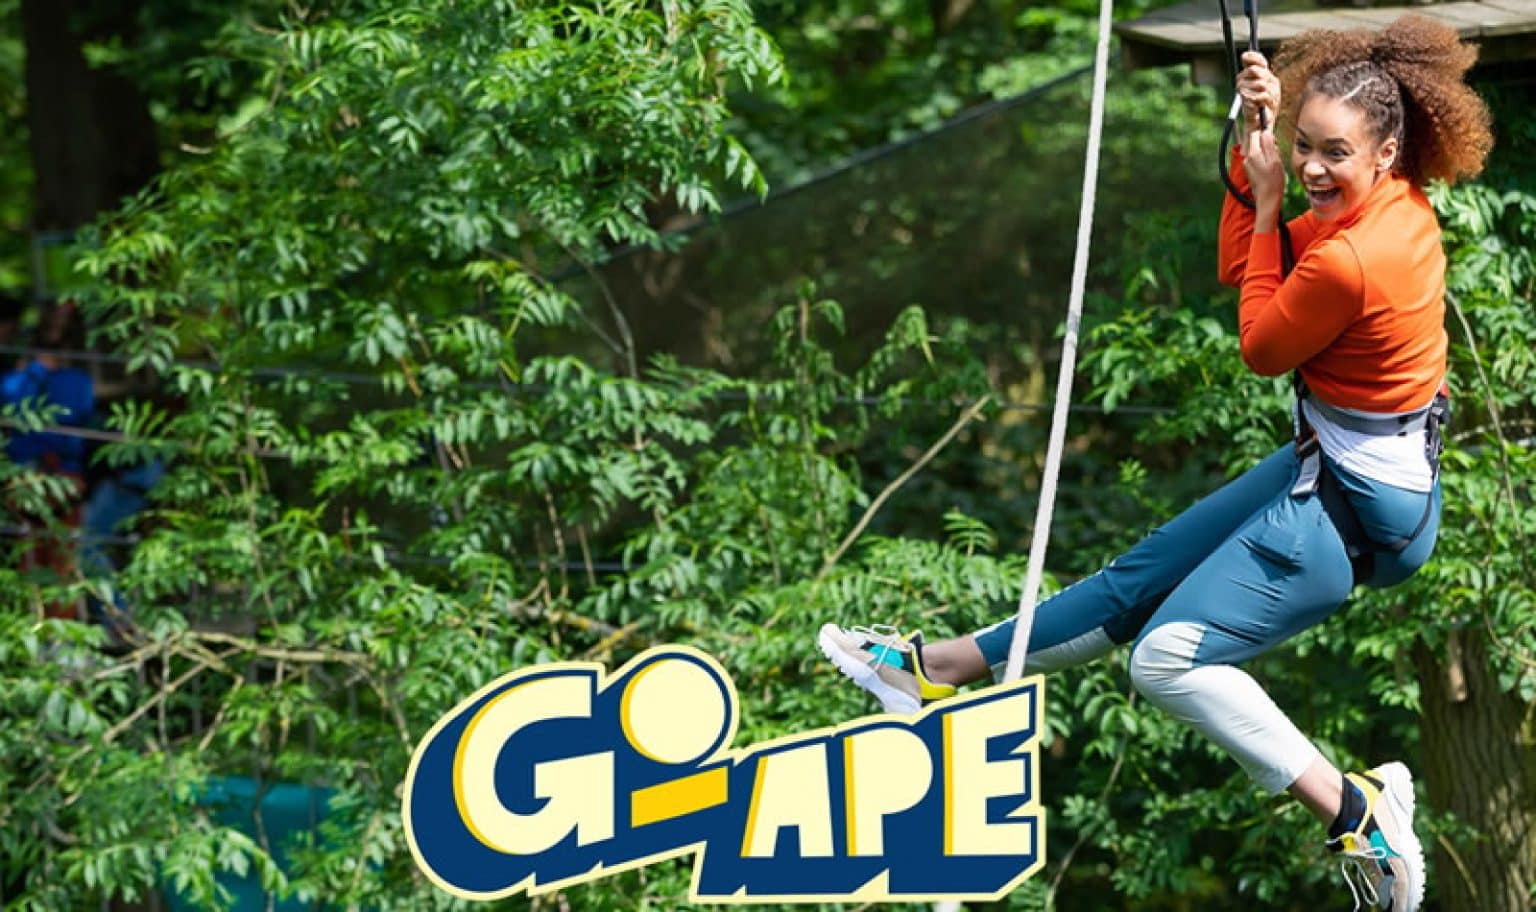 15 DISCOUNT AT GO APE Police Discount Offers